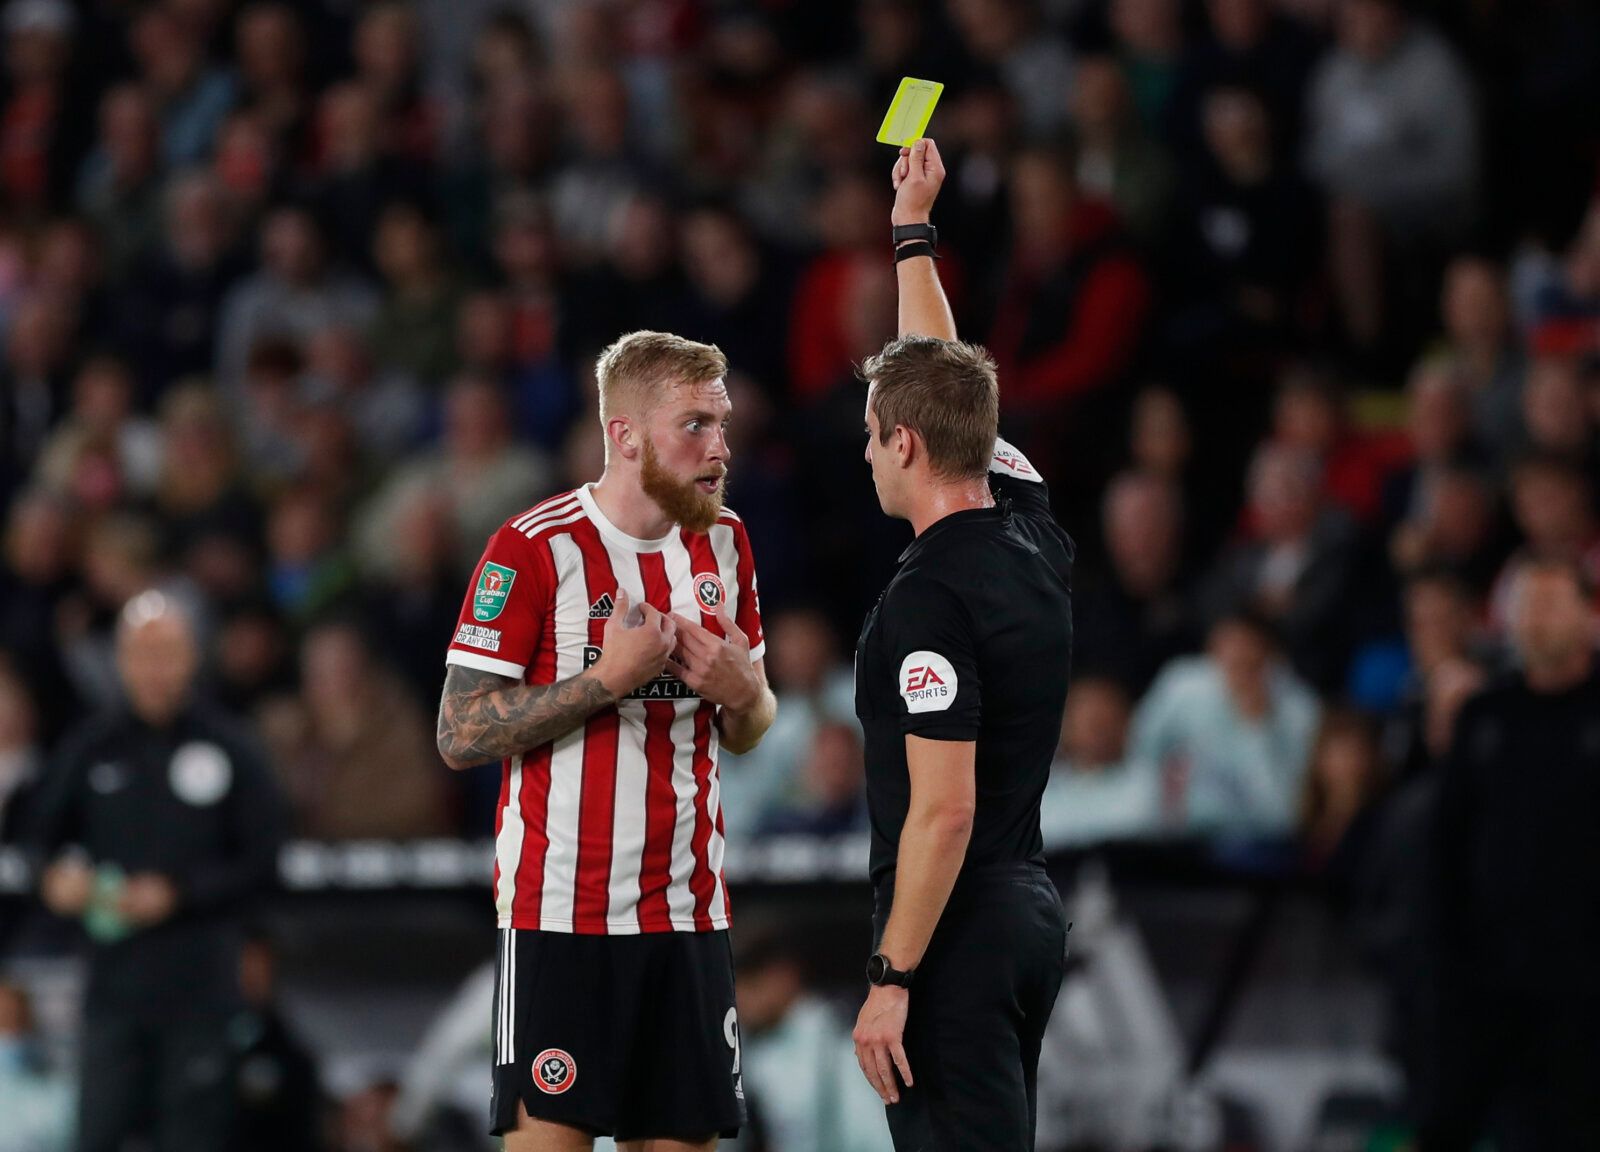 Soccer Football - Carabao Cup - Third Round - Sheffield United v Southampton - Bramall Lane, Sheffield, Britain - September 21, 2021 Sheffield United's Oliver McBurnie is shown a yellow card by referee John Brooks Action Images via Reuters/Lee Smith EDITORIAL USE ONLY. No use with unauthorized audio, video, data, fixture lists, club/league logos or 'live' services. Online in-match use limited to 75 images, no video emulation. No use in betting, games or single club /league/player publications.  